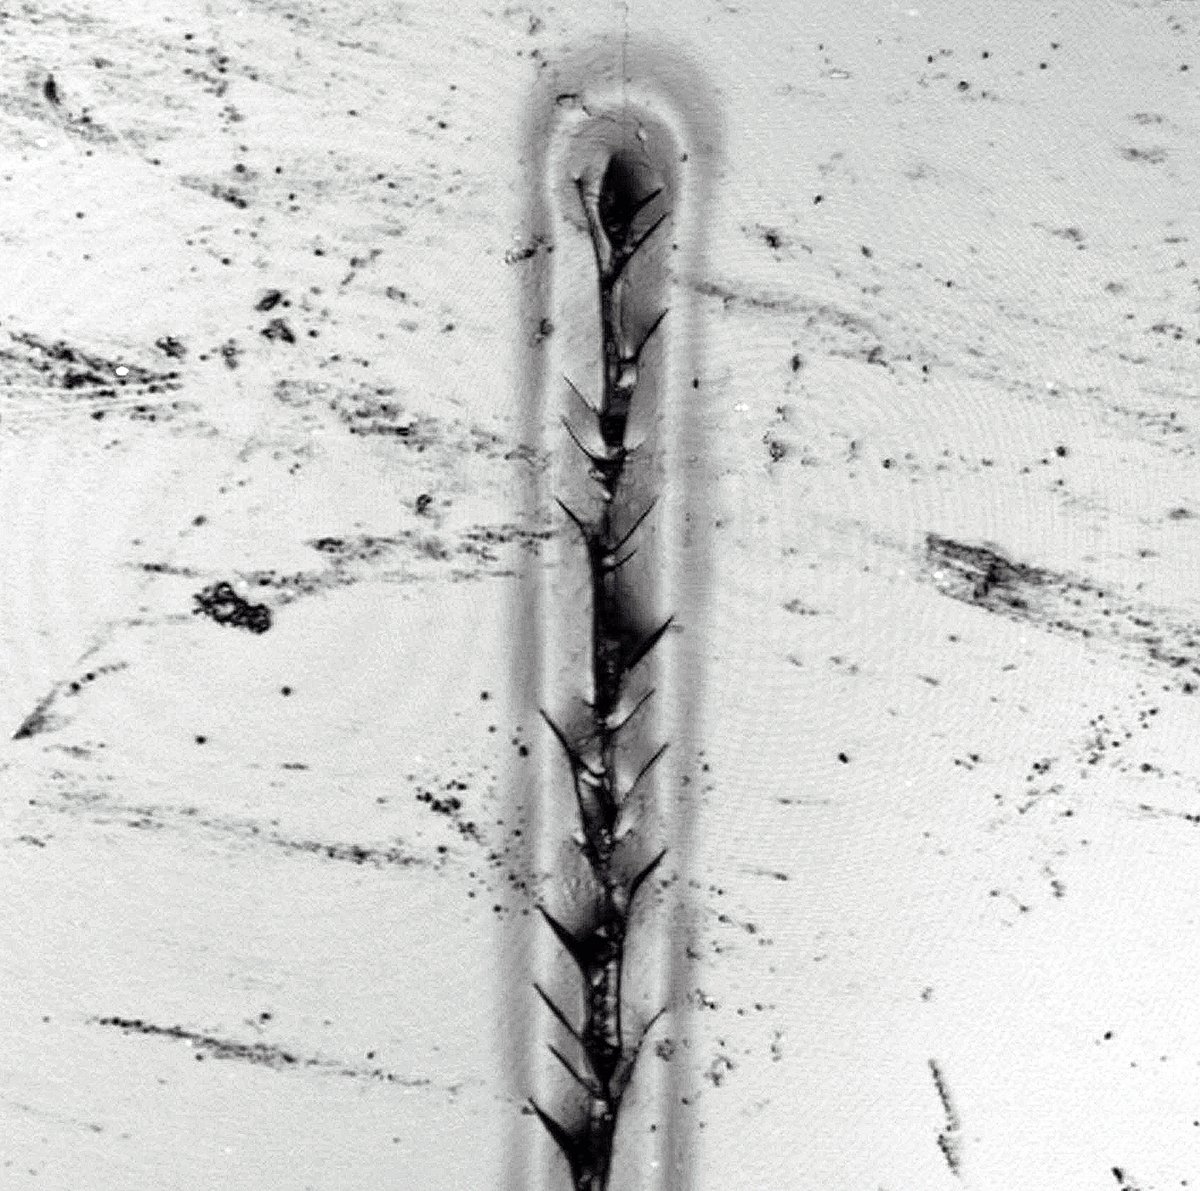 Photomicrograph showing the result of a NIST nanoscale scratch test on a sample of automobile clearcoat material. The scratch, which shows fractures radiating from the line of impact, is 20 micrometers wide, 150 micrometers long and 2 micrometers deep (A micrometer is a millionth of a meter or about half the length of an average E. coli bacterium.).  Credit: NIST